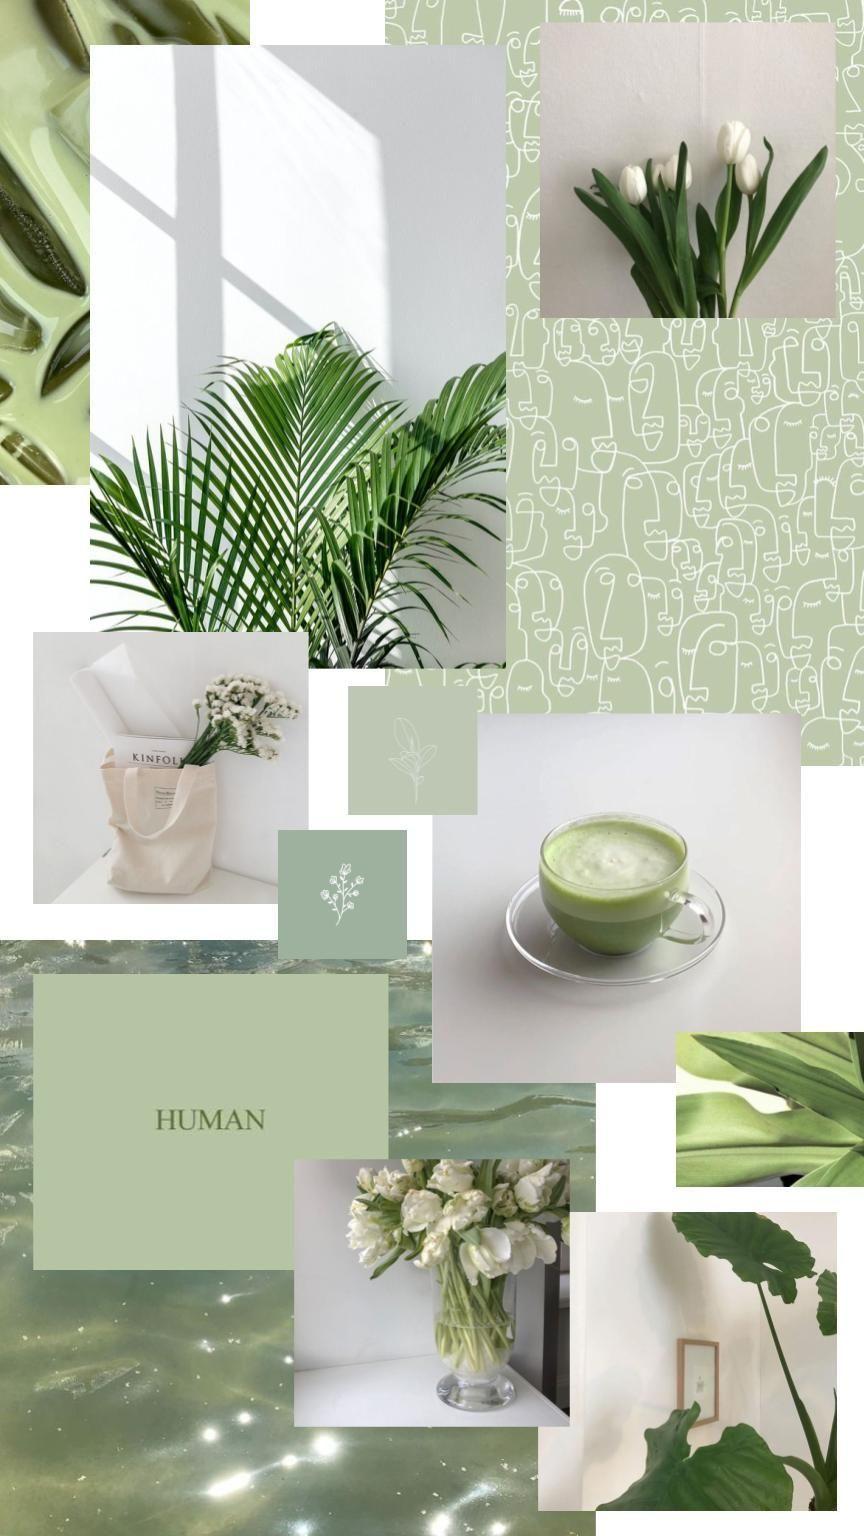 Adorable Animal Wallpaper With Matcha Green And Yellow Gradient Page Border  Background Word Template And Google Docs For Free Download